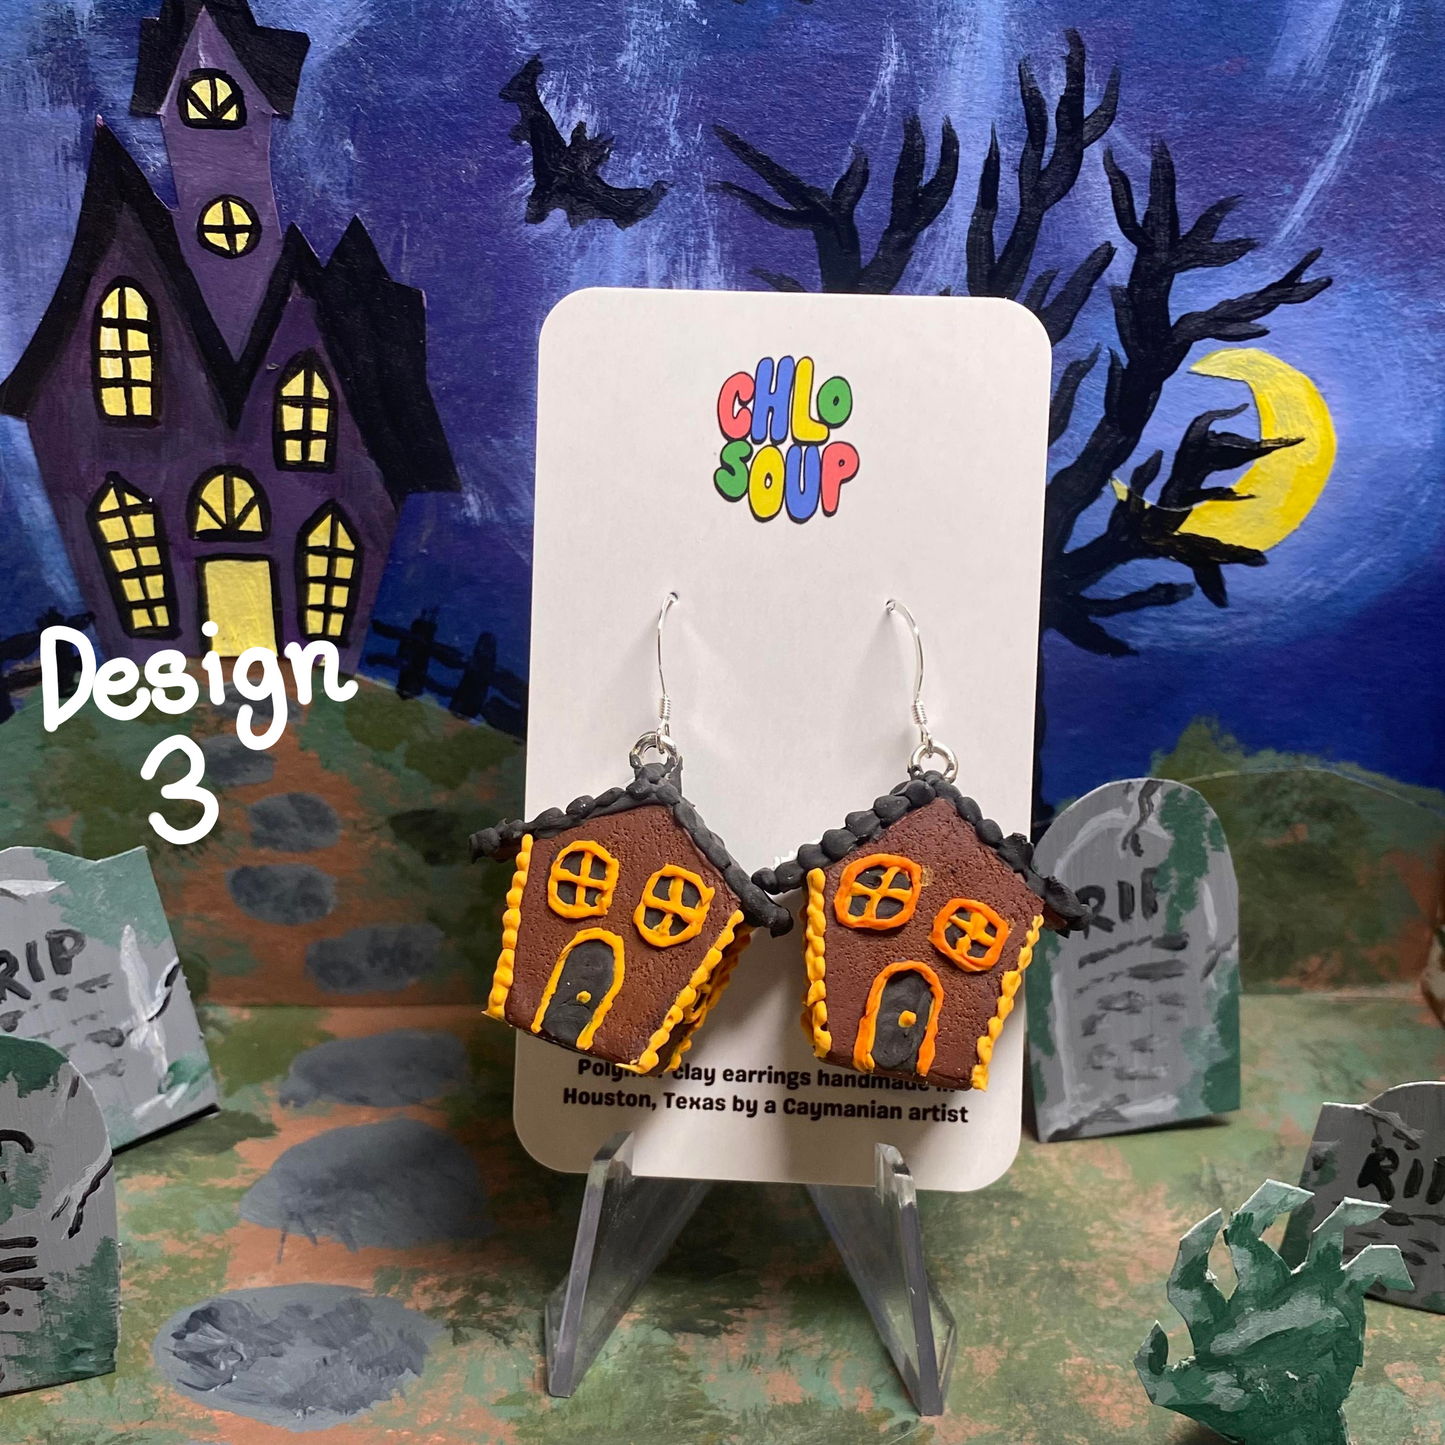 Small Haunted Gingerbread Houses - 7 Designs!